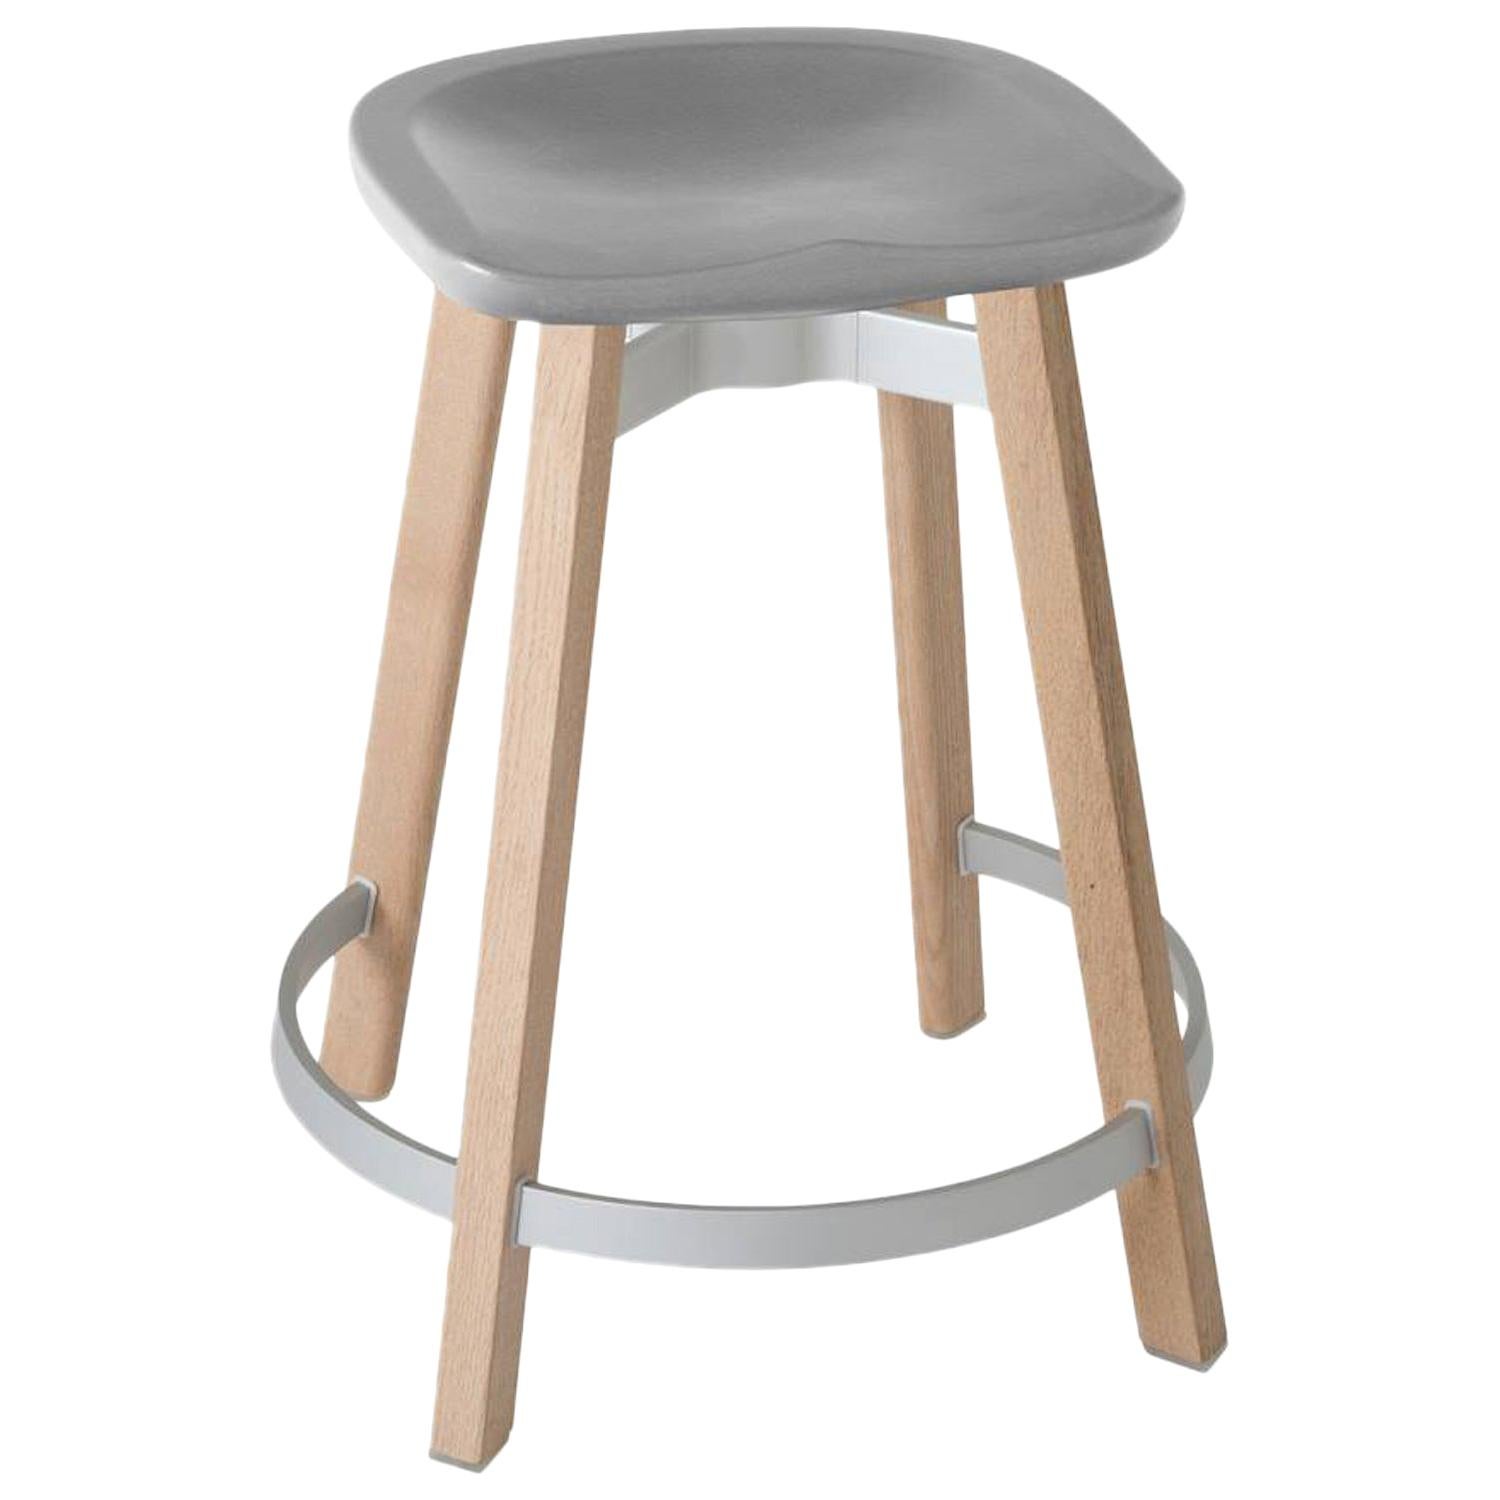 Emeco Su Counter Stool in Wood w/ Flint Seat by Nendo